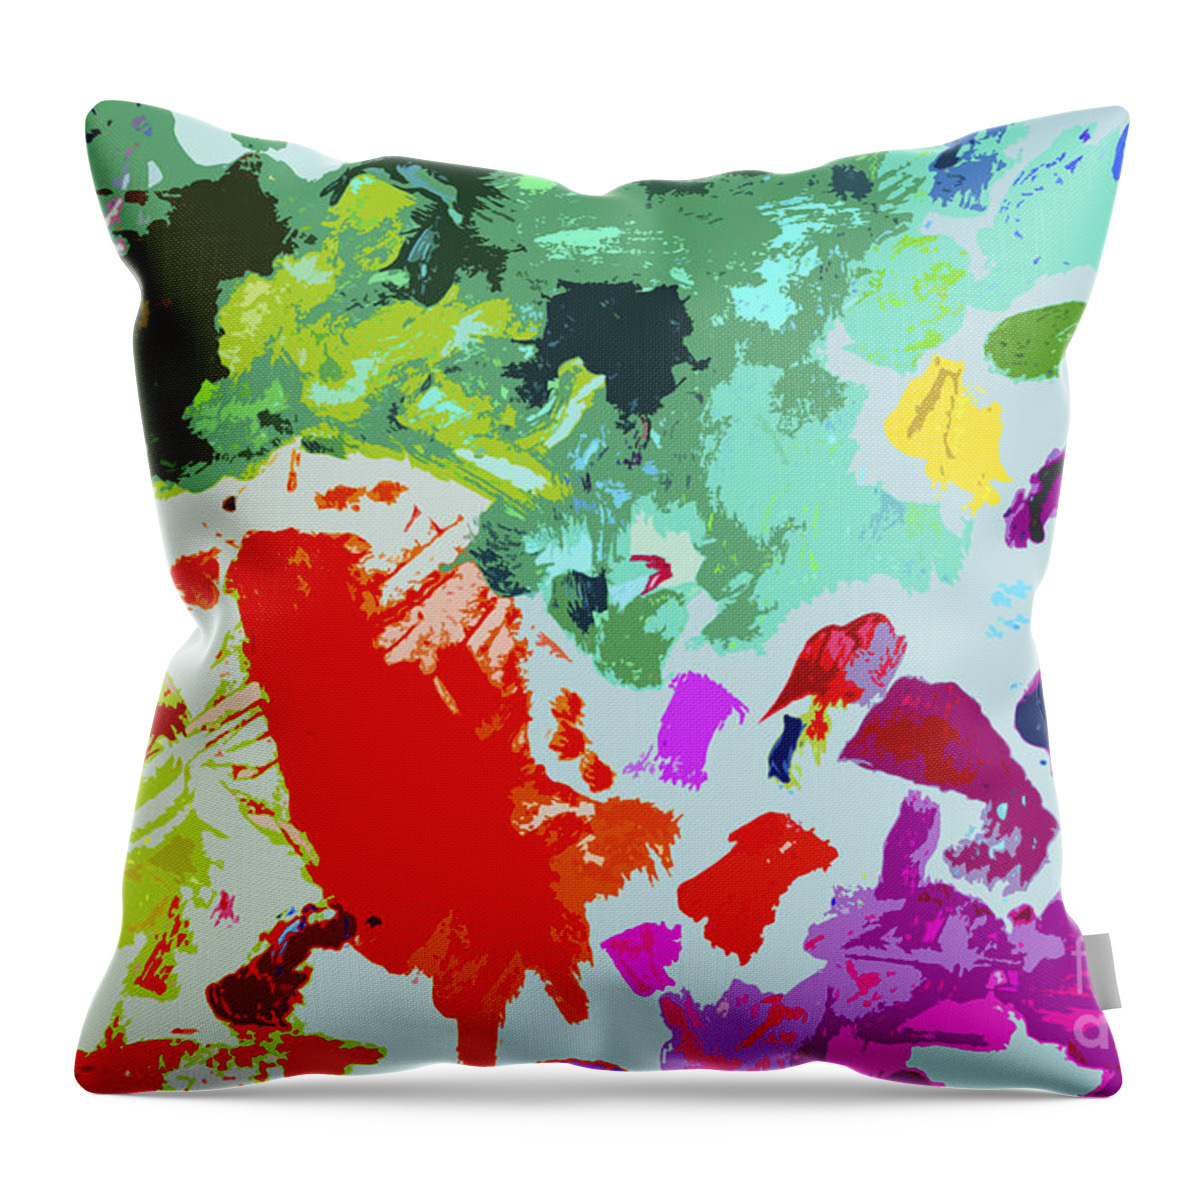 Metaphysical Throw Pillow featuring the painting Palettescape by Jeanette French